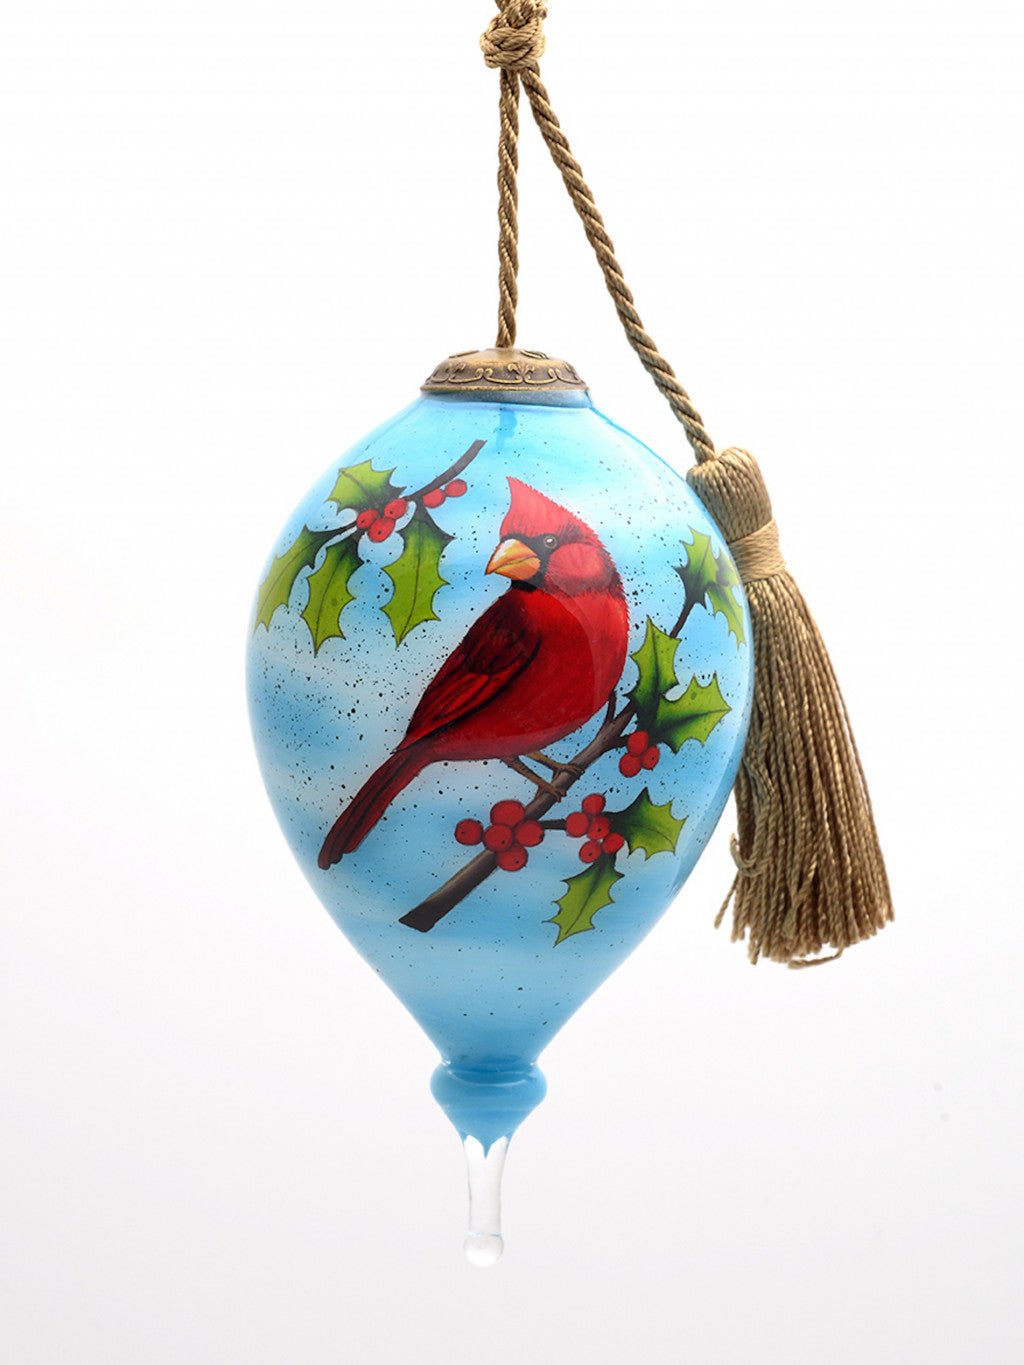 Red-Cardinal-on-Christmas-Holly-Branches-Hand-Painted-Mouth-Blown-Glass-Ornament-Christmas-Ornaments